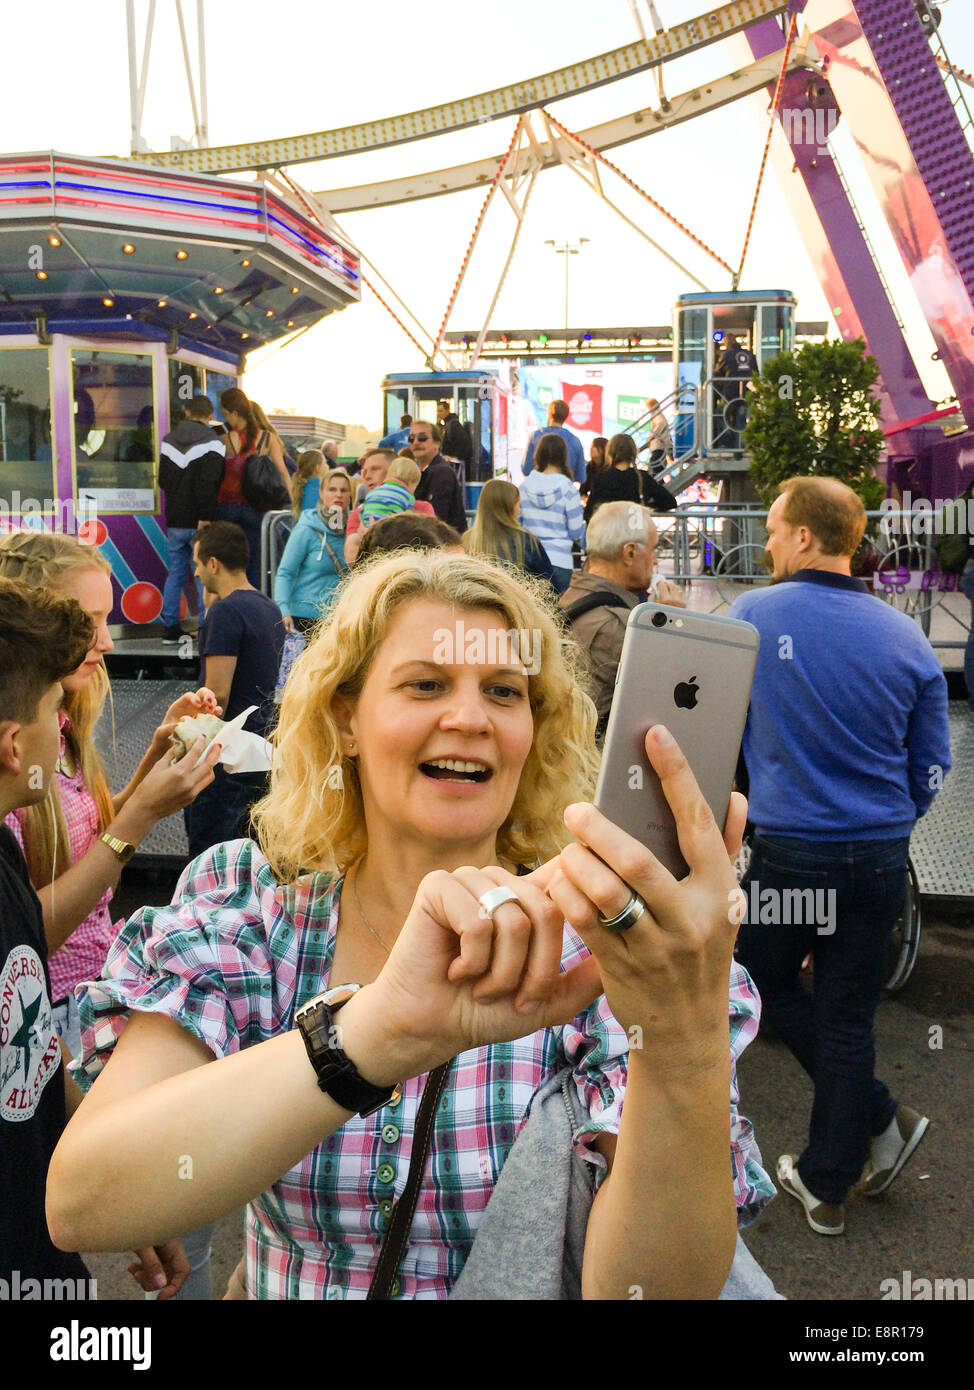 Stuttgart, Germany - October 4, 2014: A middle aged women in traditional dirndl dress is taking selfie using the new Apple iPhon Stock Photo